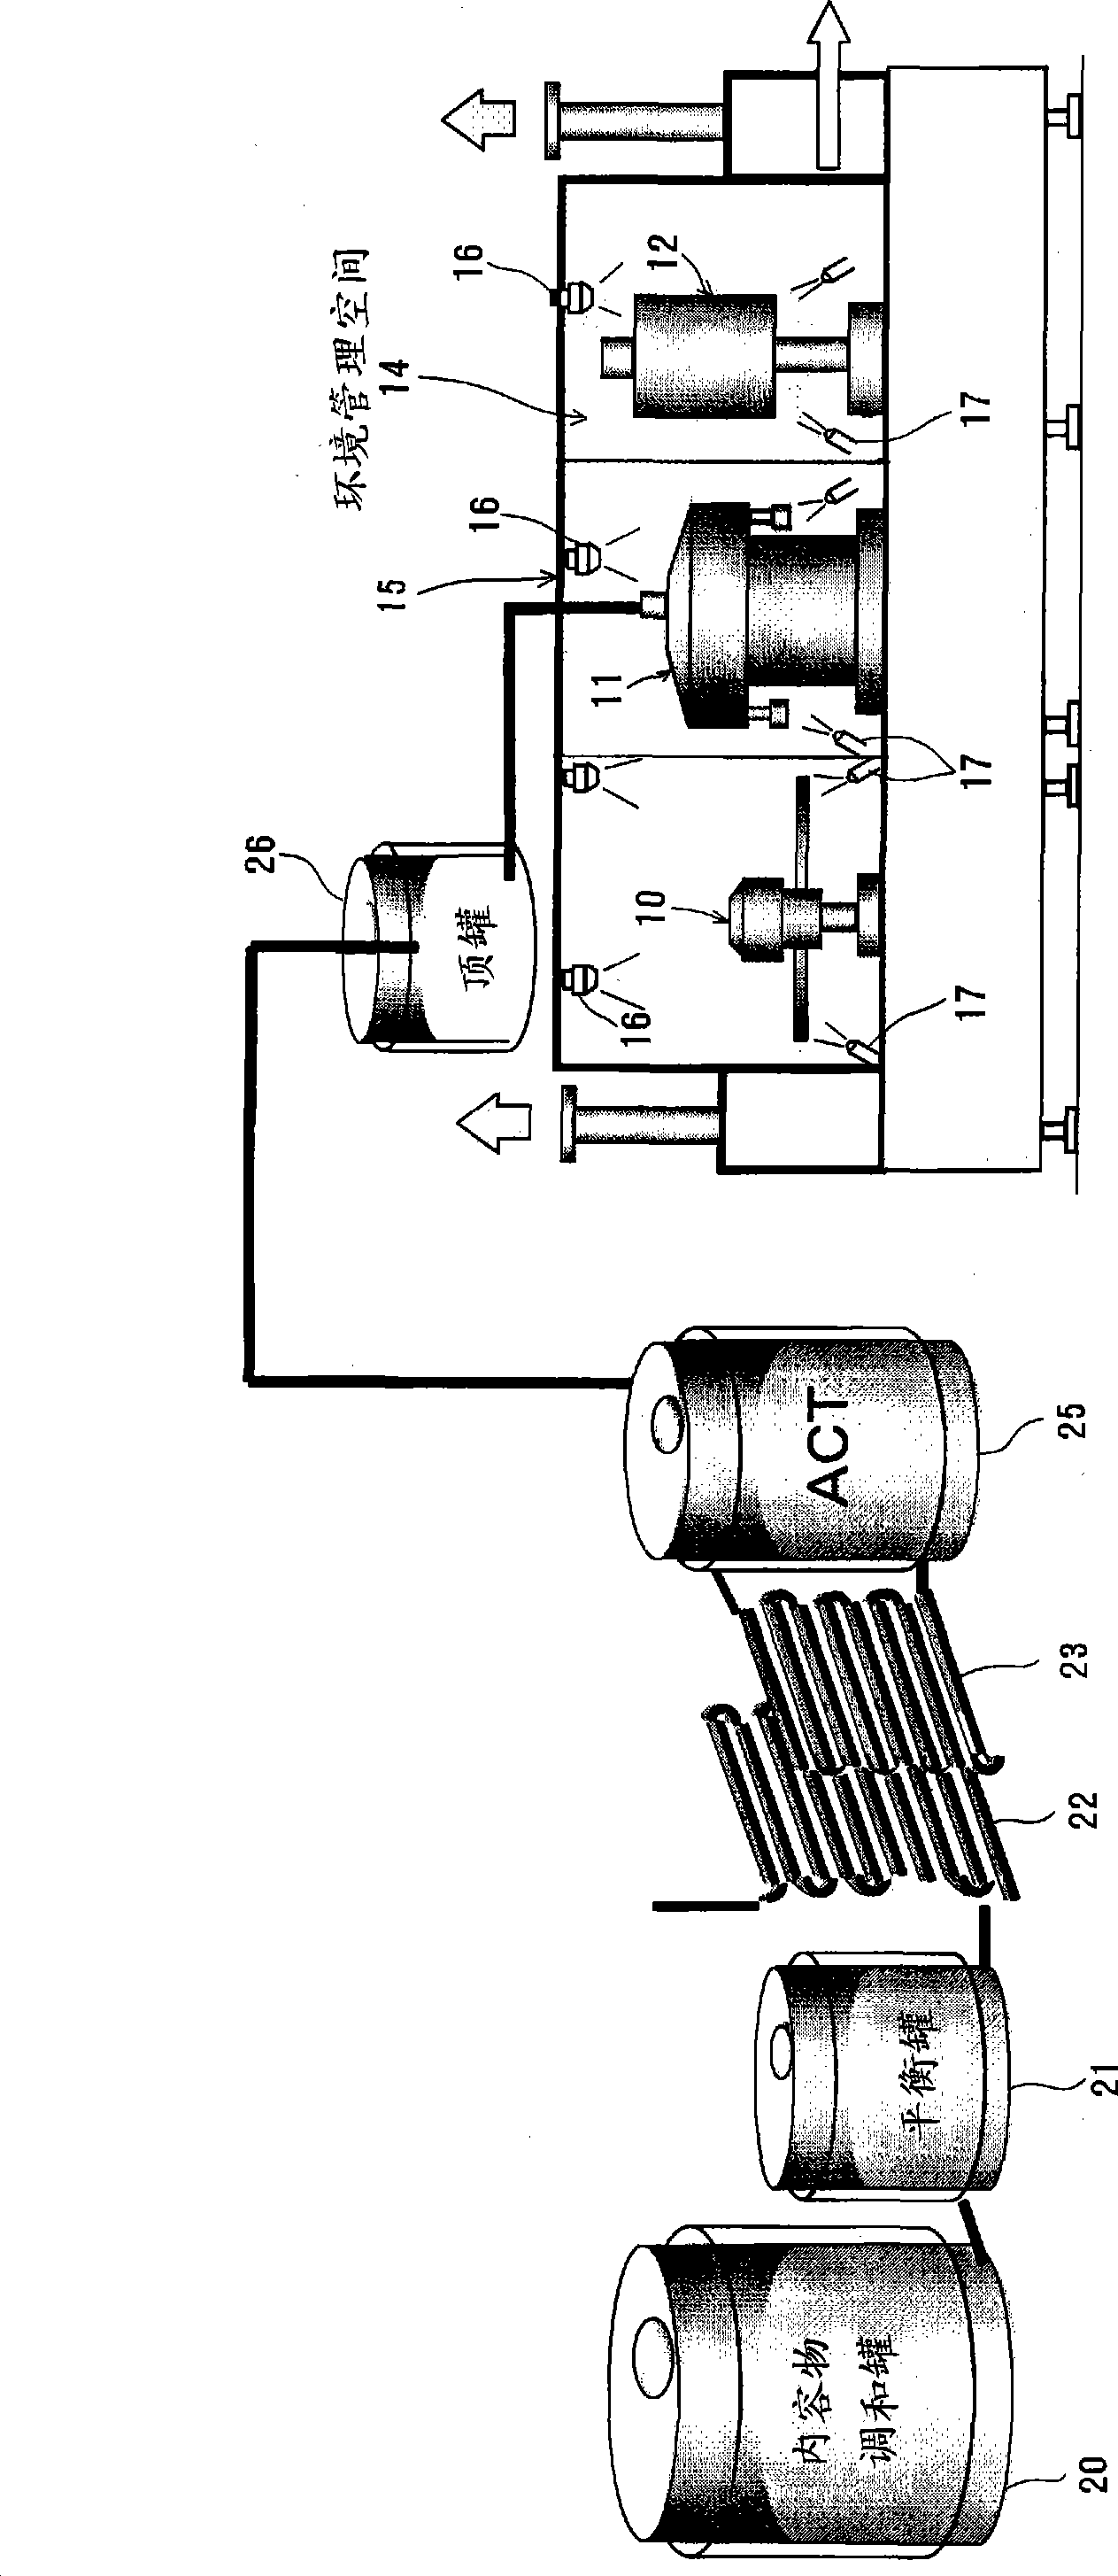 Method for manufacturing beverage filled in container